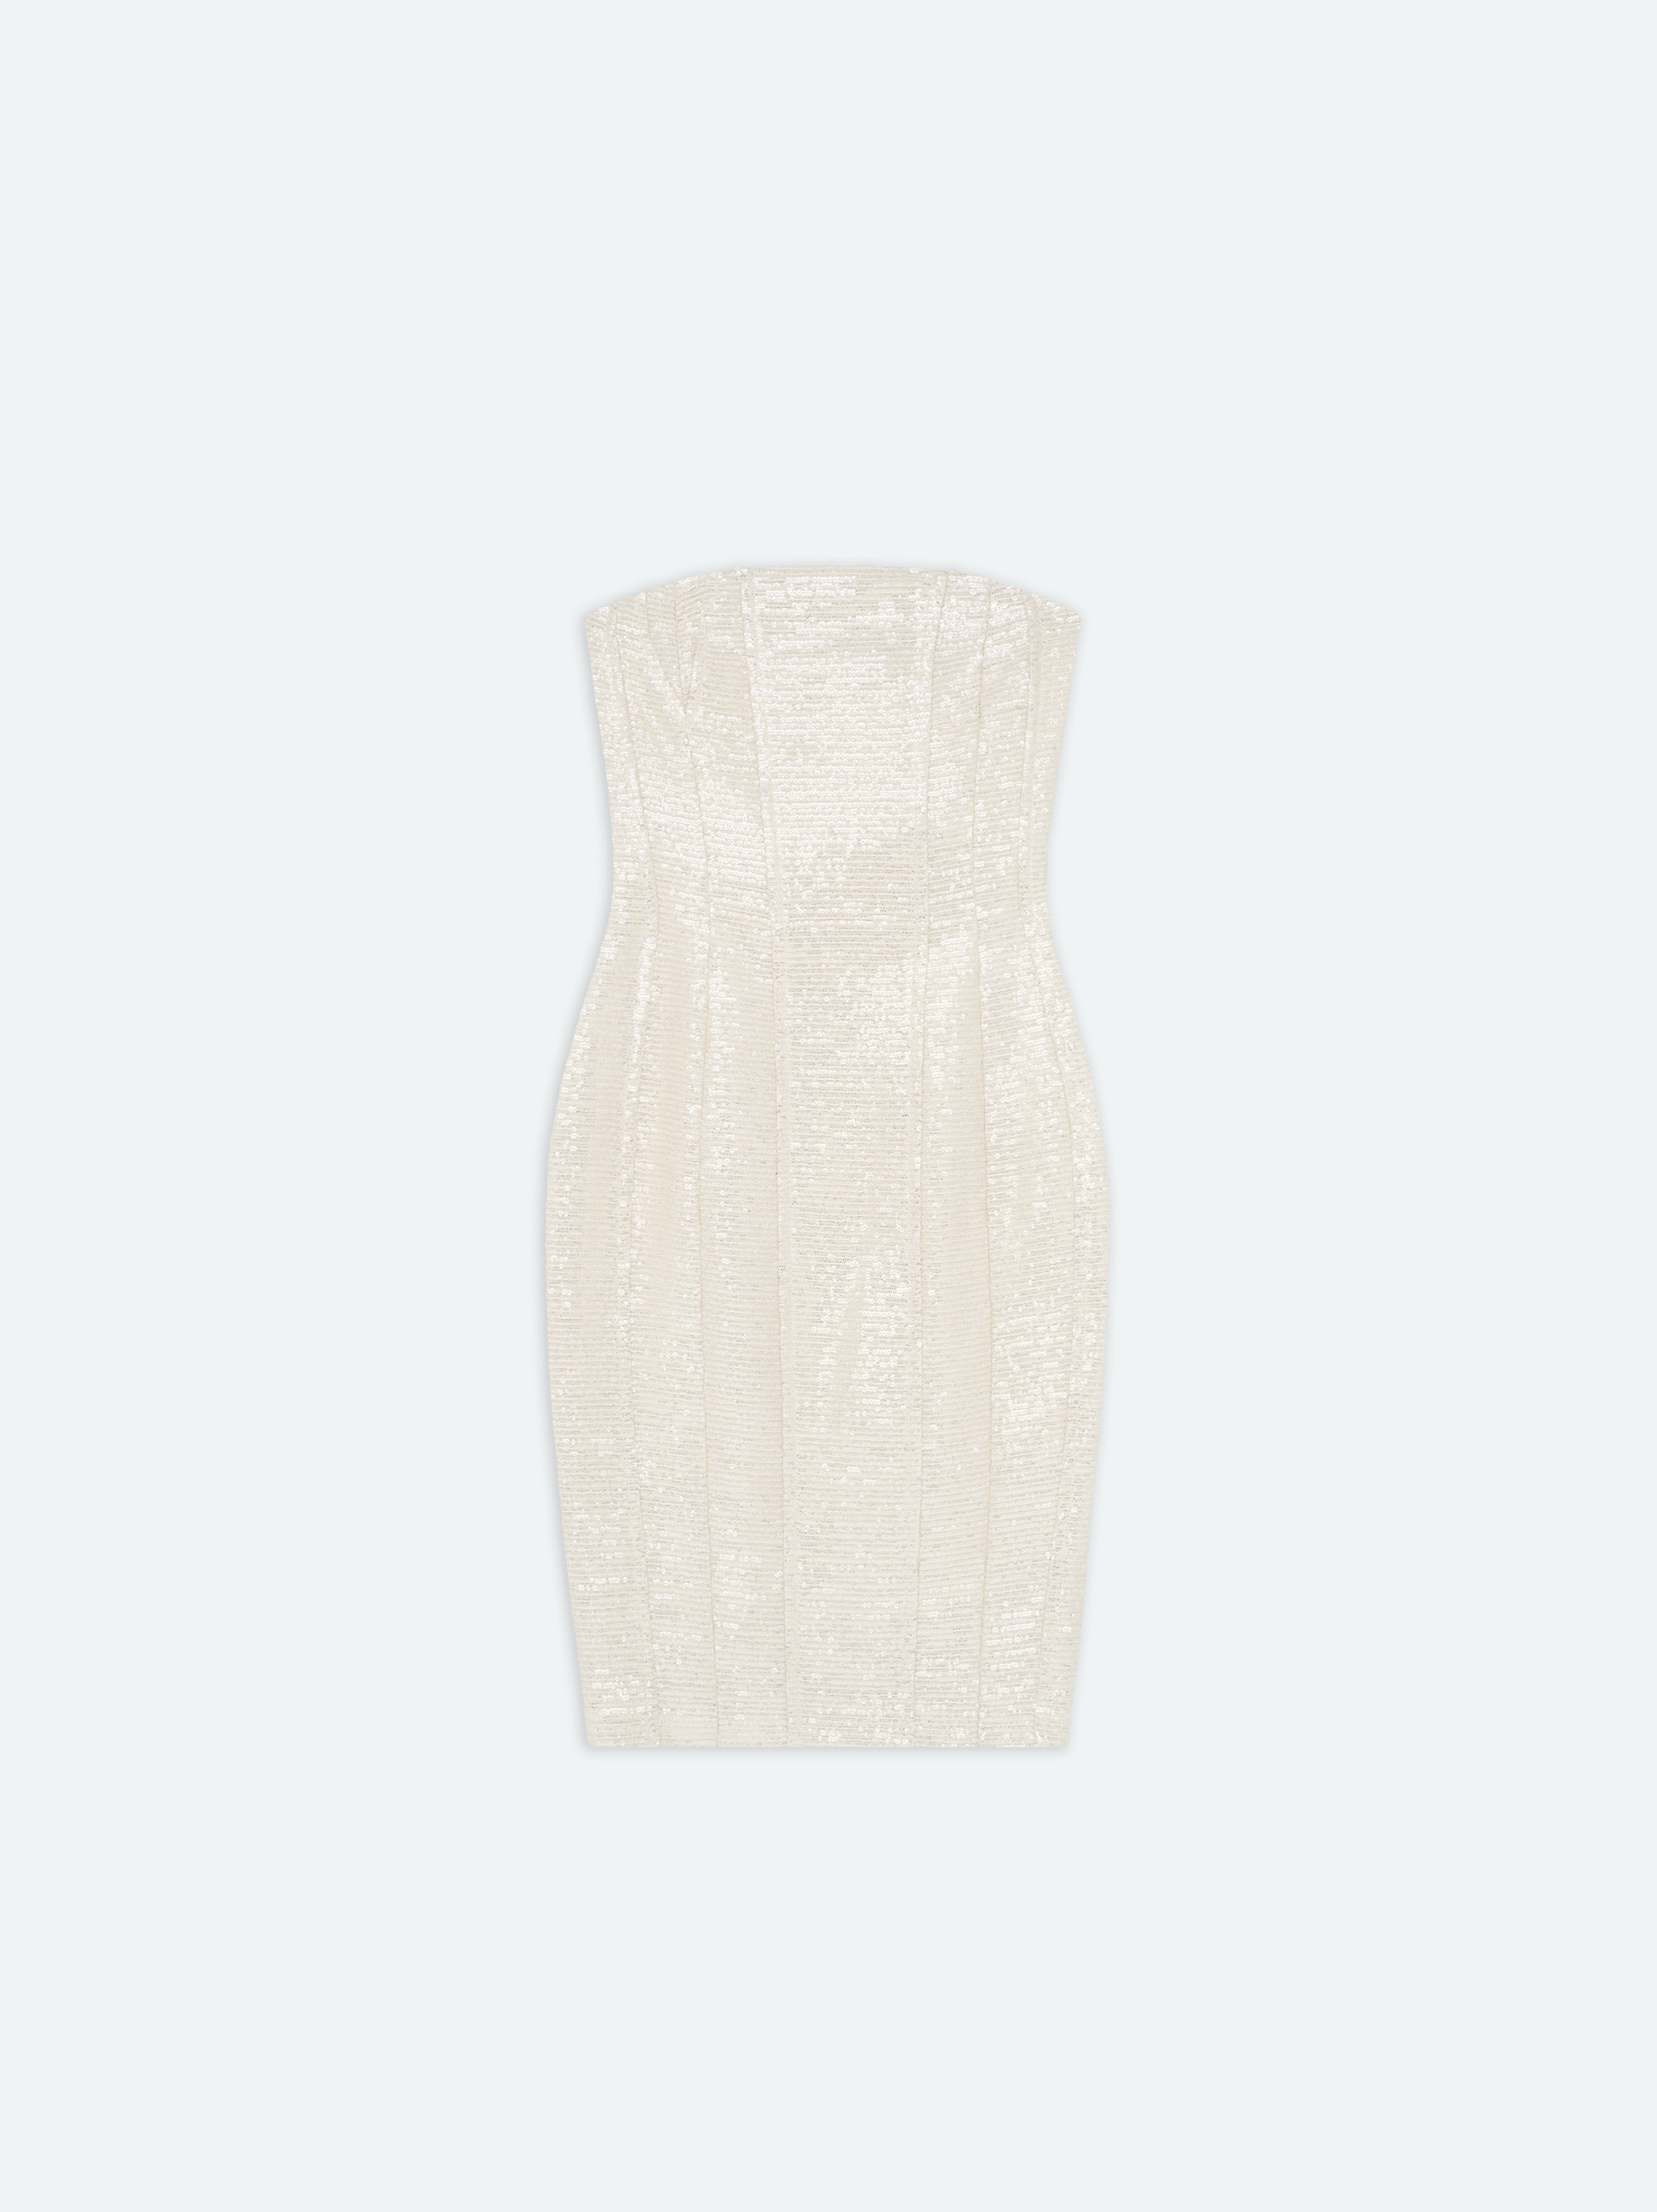 Product WOMEN - CHIFFON SEQUIN MA BUSTIER DRESS - Alabaster featured image